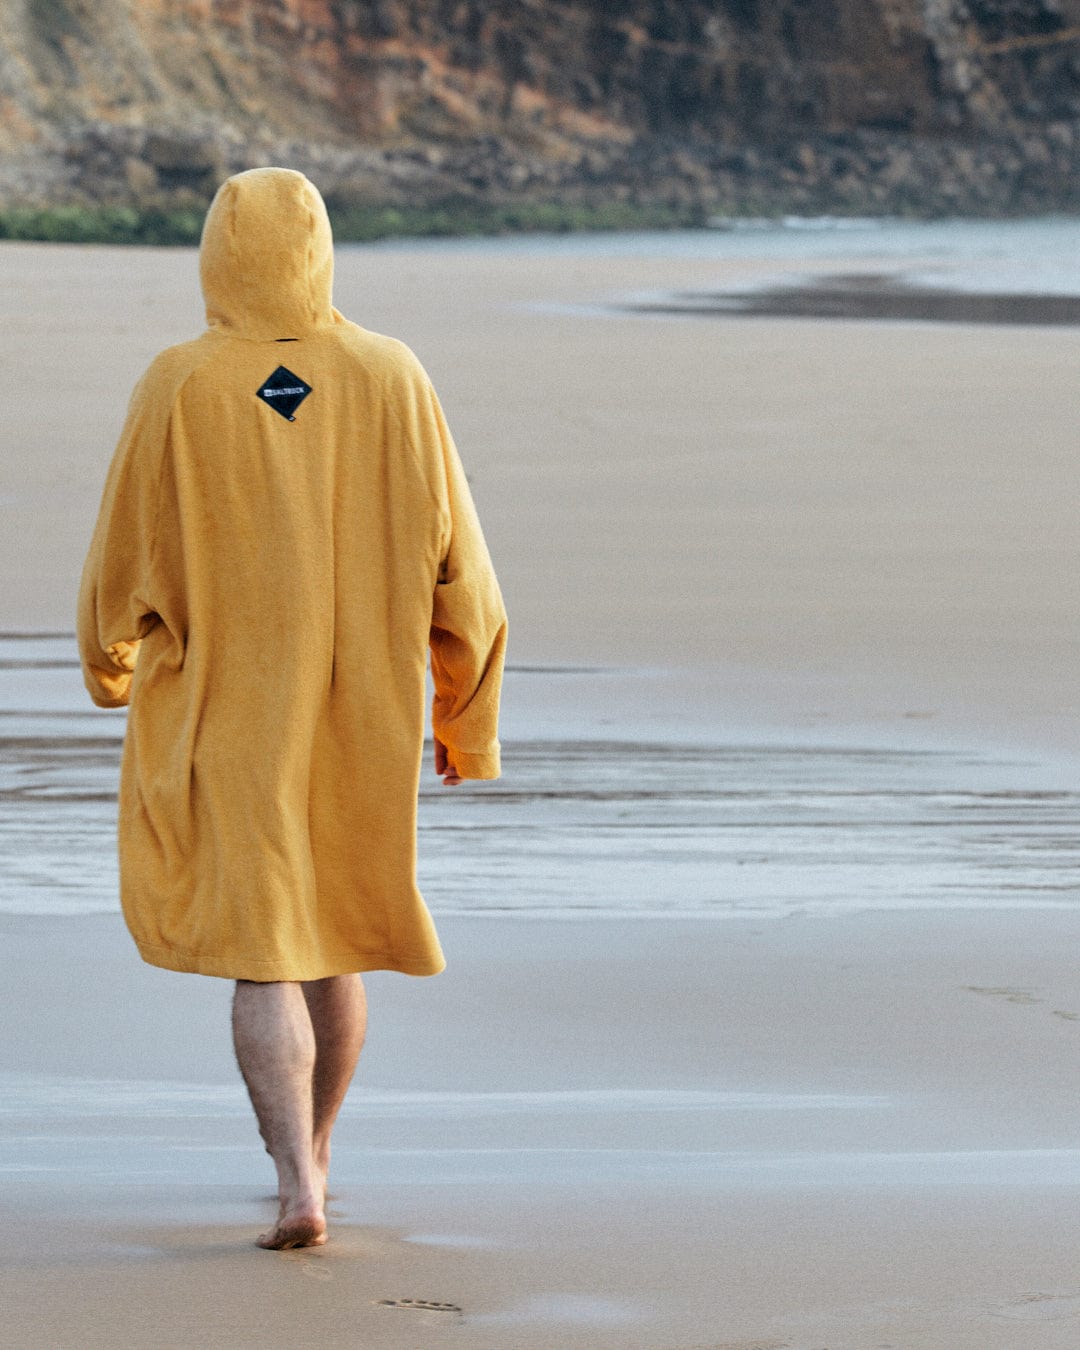 Person in a Saltrock 3 in 1 Recycled Four Seasons Changing Robe - Black/Yellow, walking away from the camera on a sandy beach, with cliffs in the background.